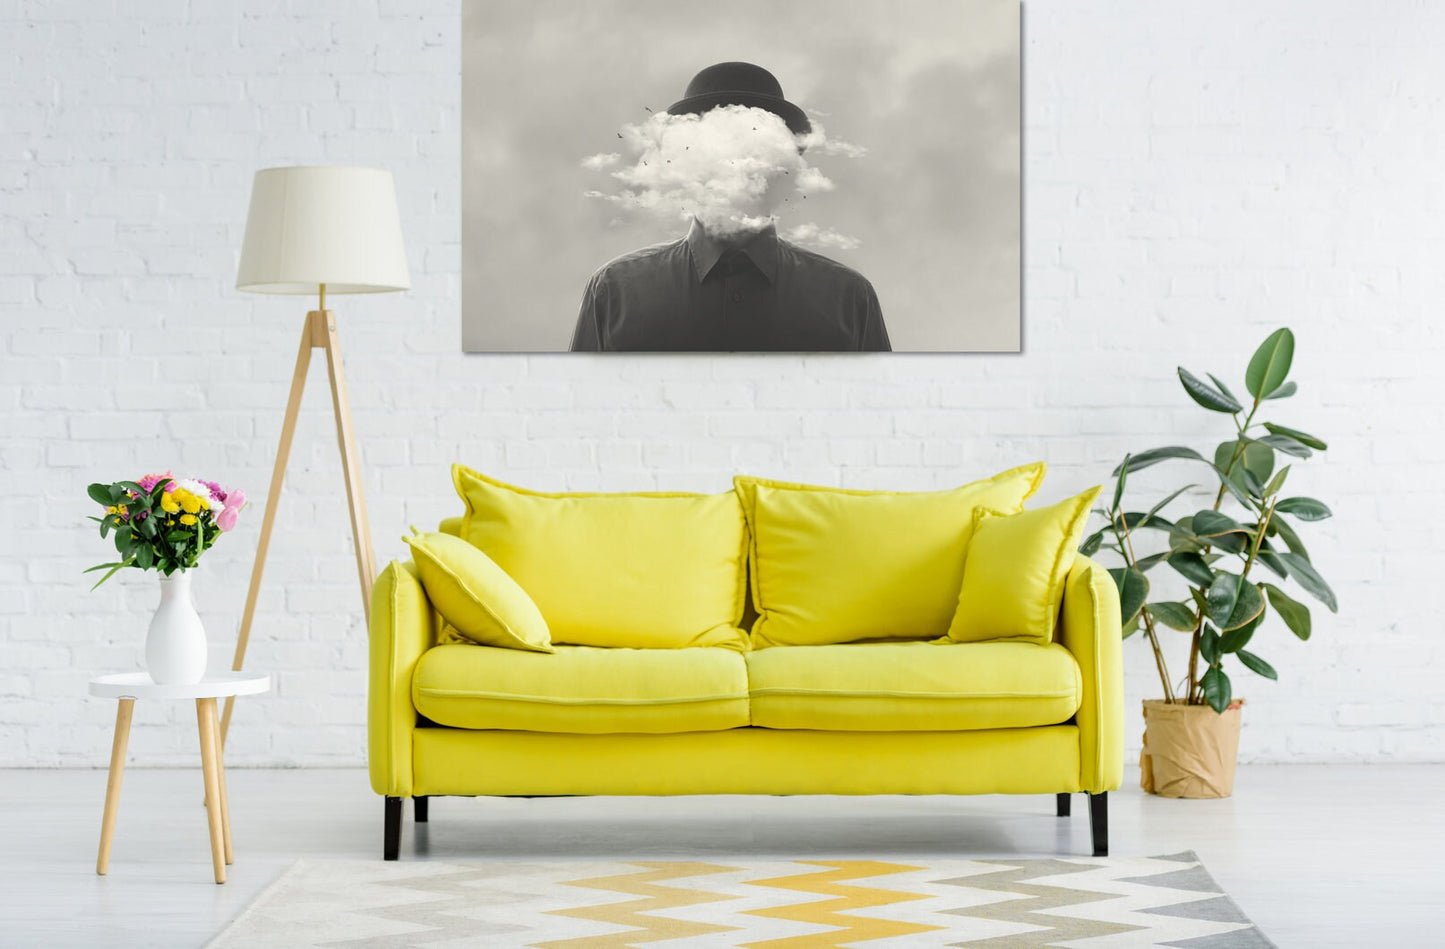 Surreal wall art, surreal painting, black and white canvas wall art, cloud painting, surreal art prints, extra large canvas art painting